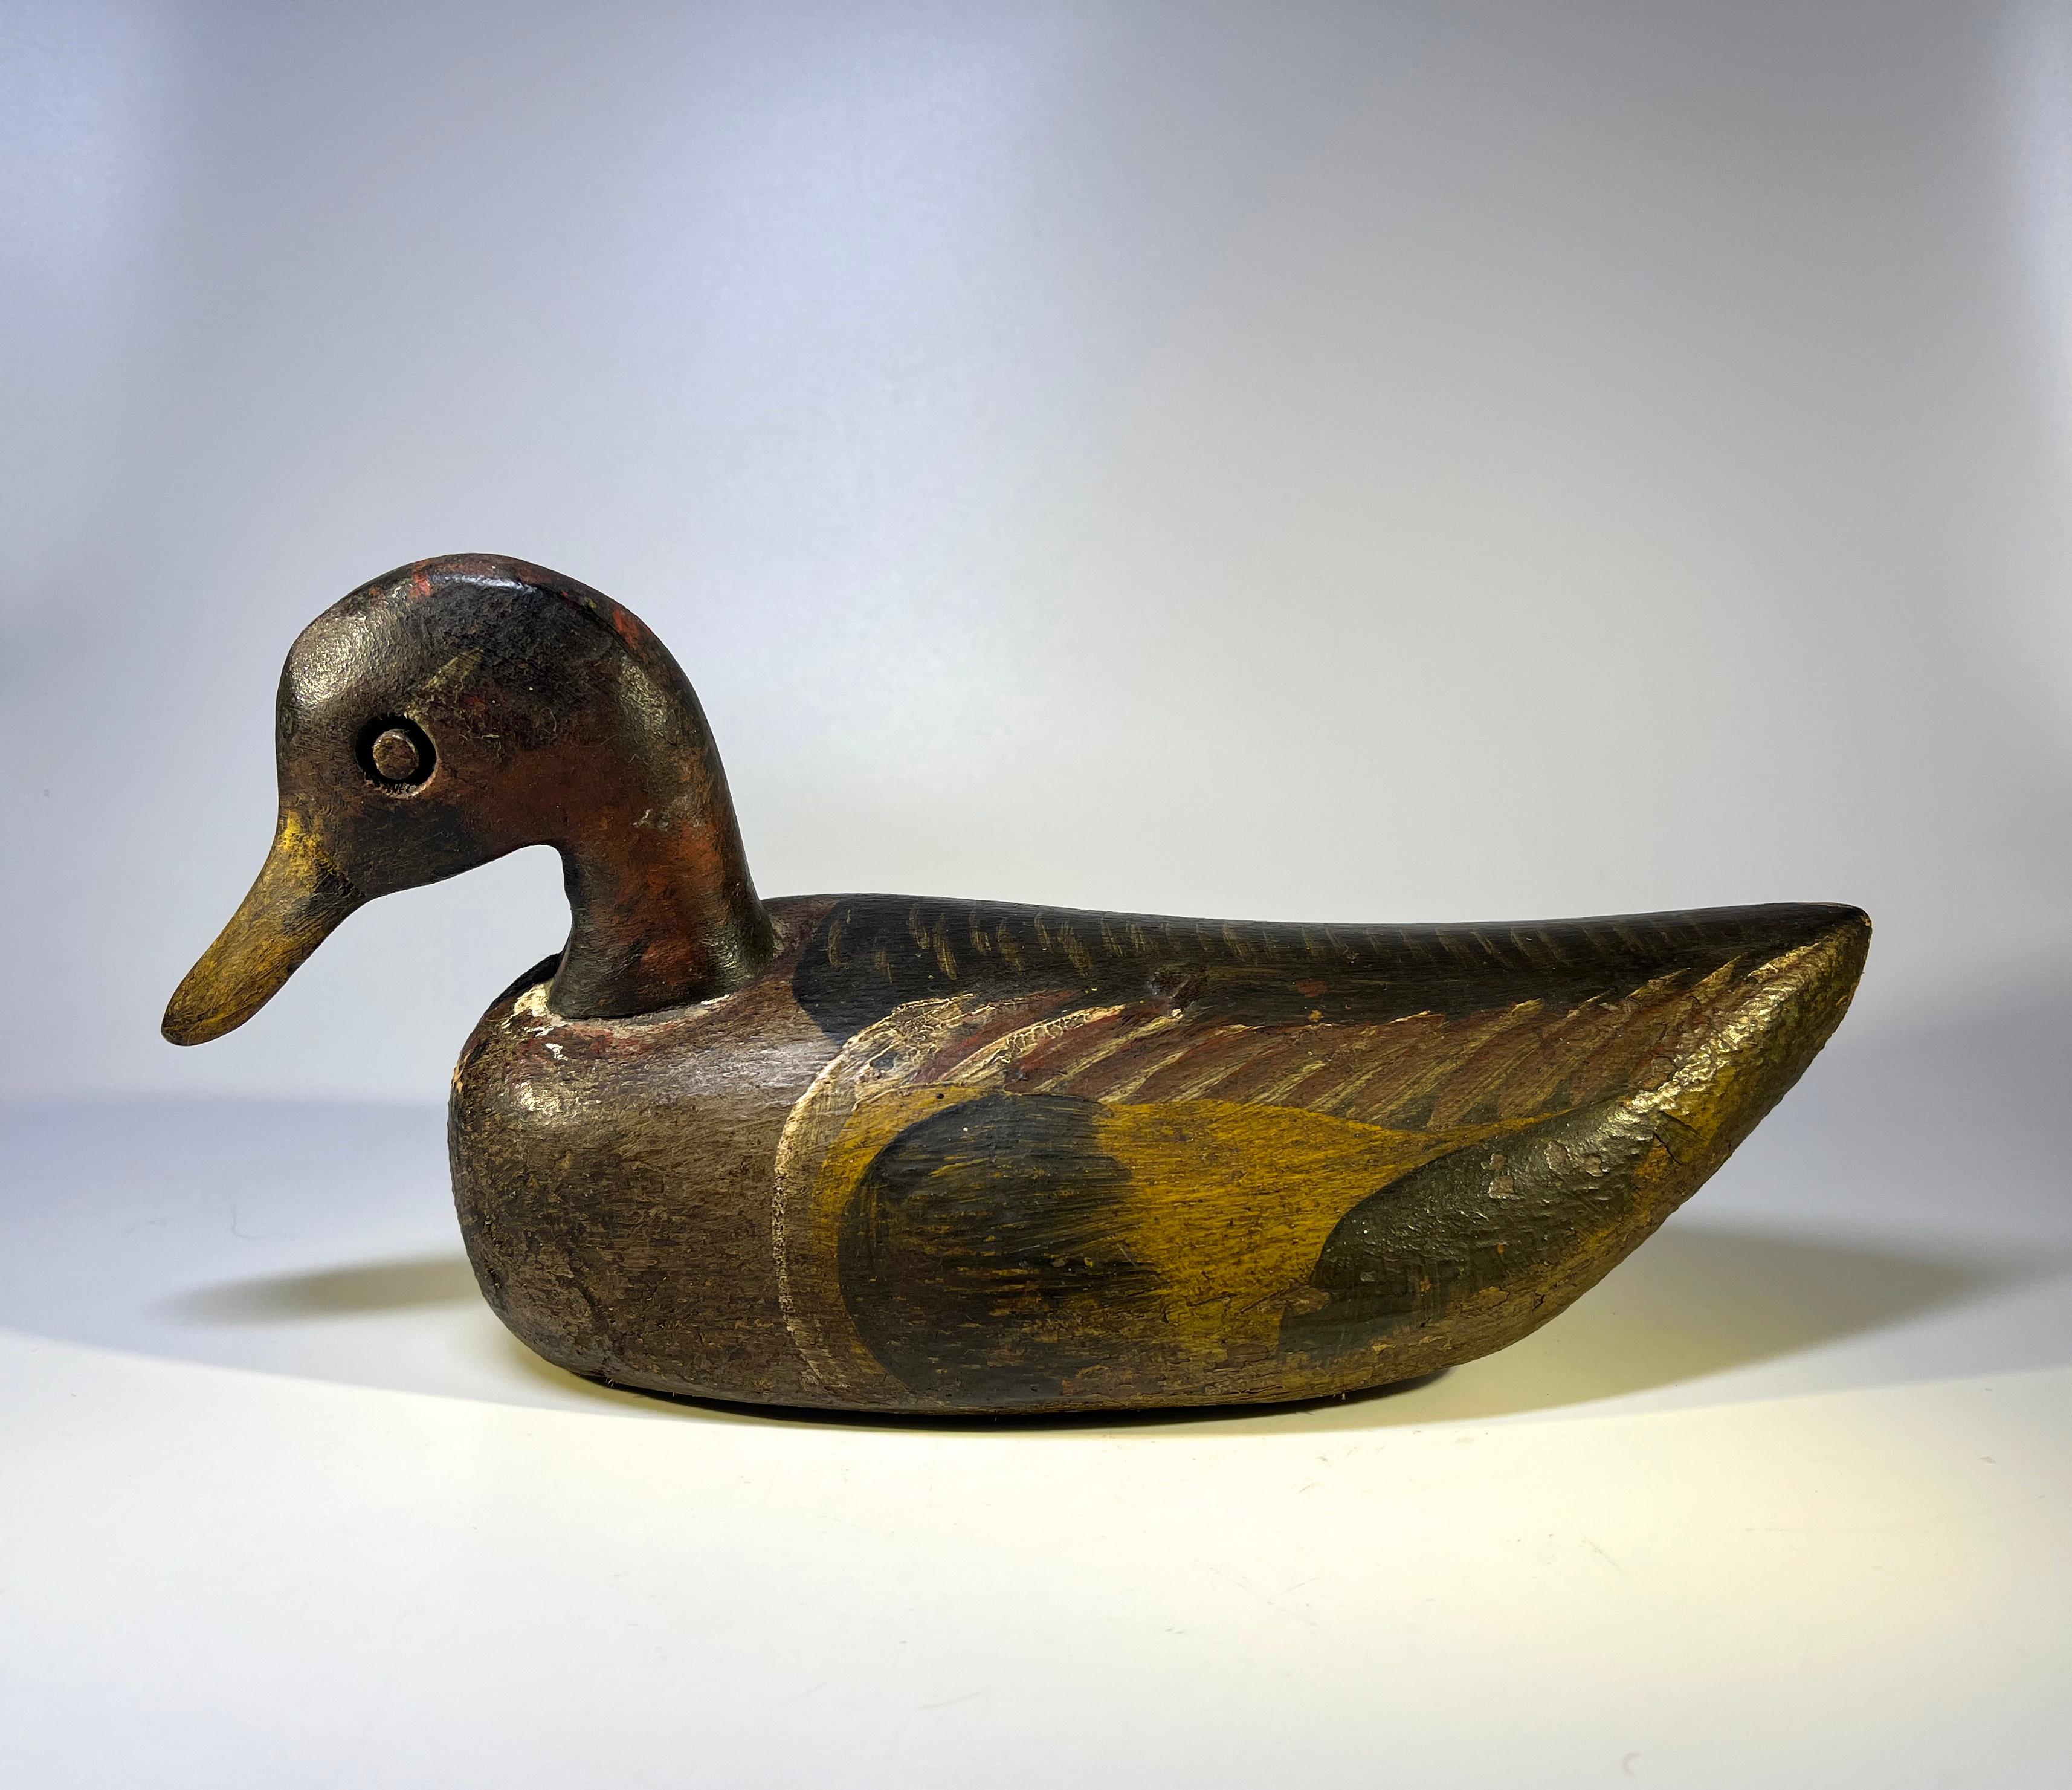 Antique English wood and cork waterfowl decoy with superb original paint
Aged hand painted surface, lightweight and handcrafted in England.
Circa early 20th century.
Tip of beak to tail 11 inch, width across body 4.5 inch, height 5